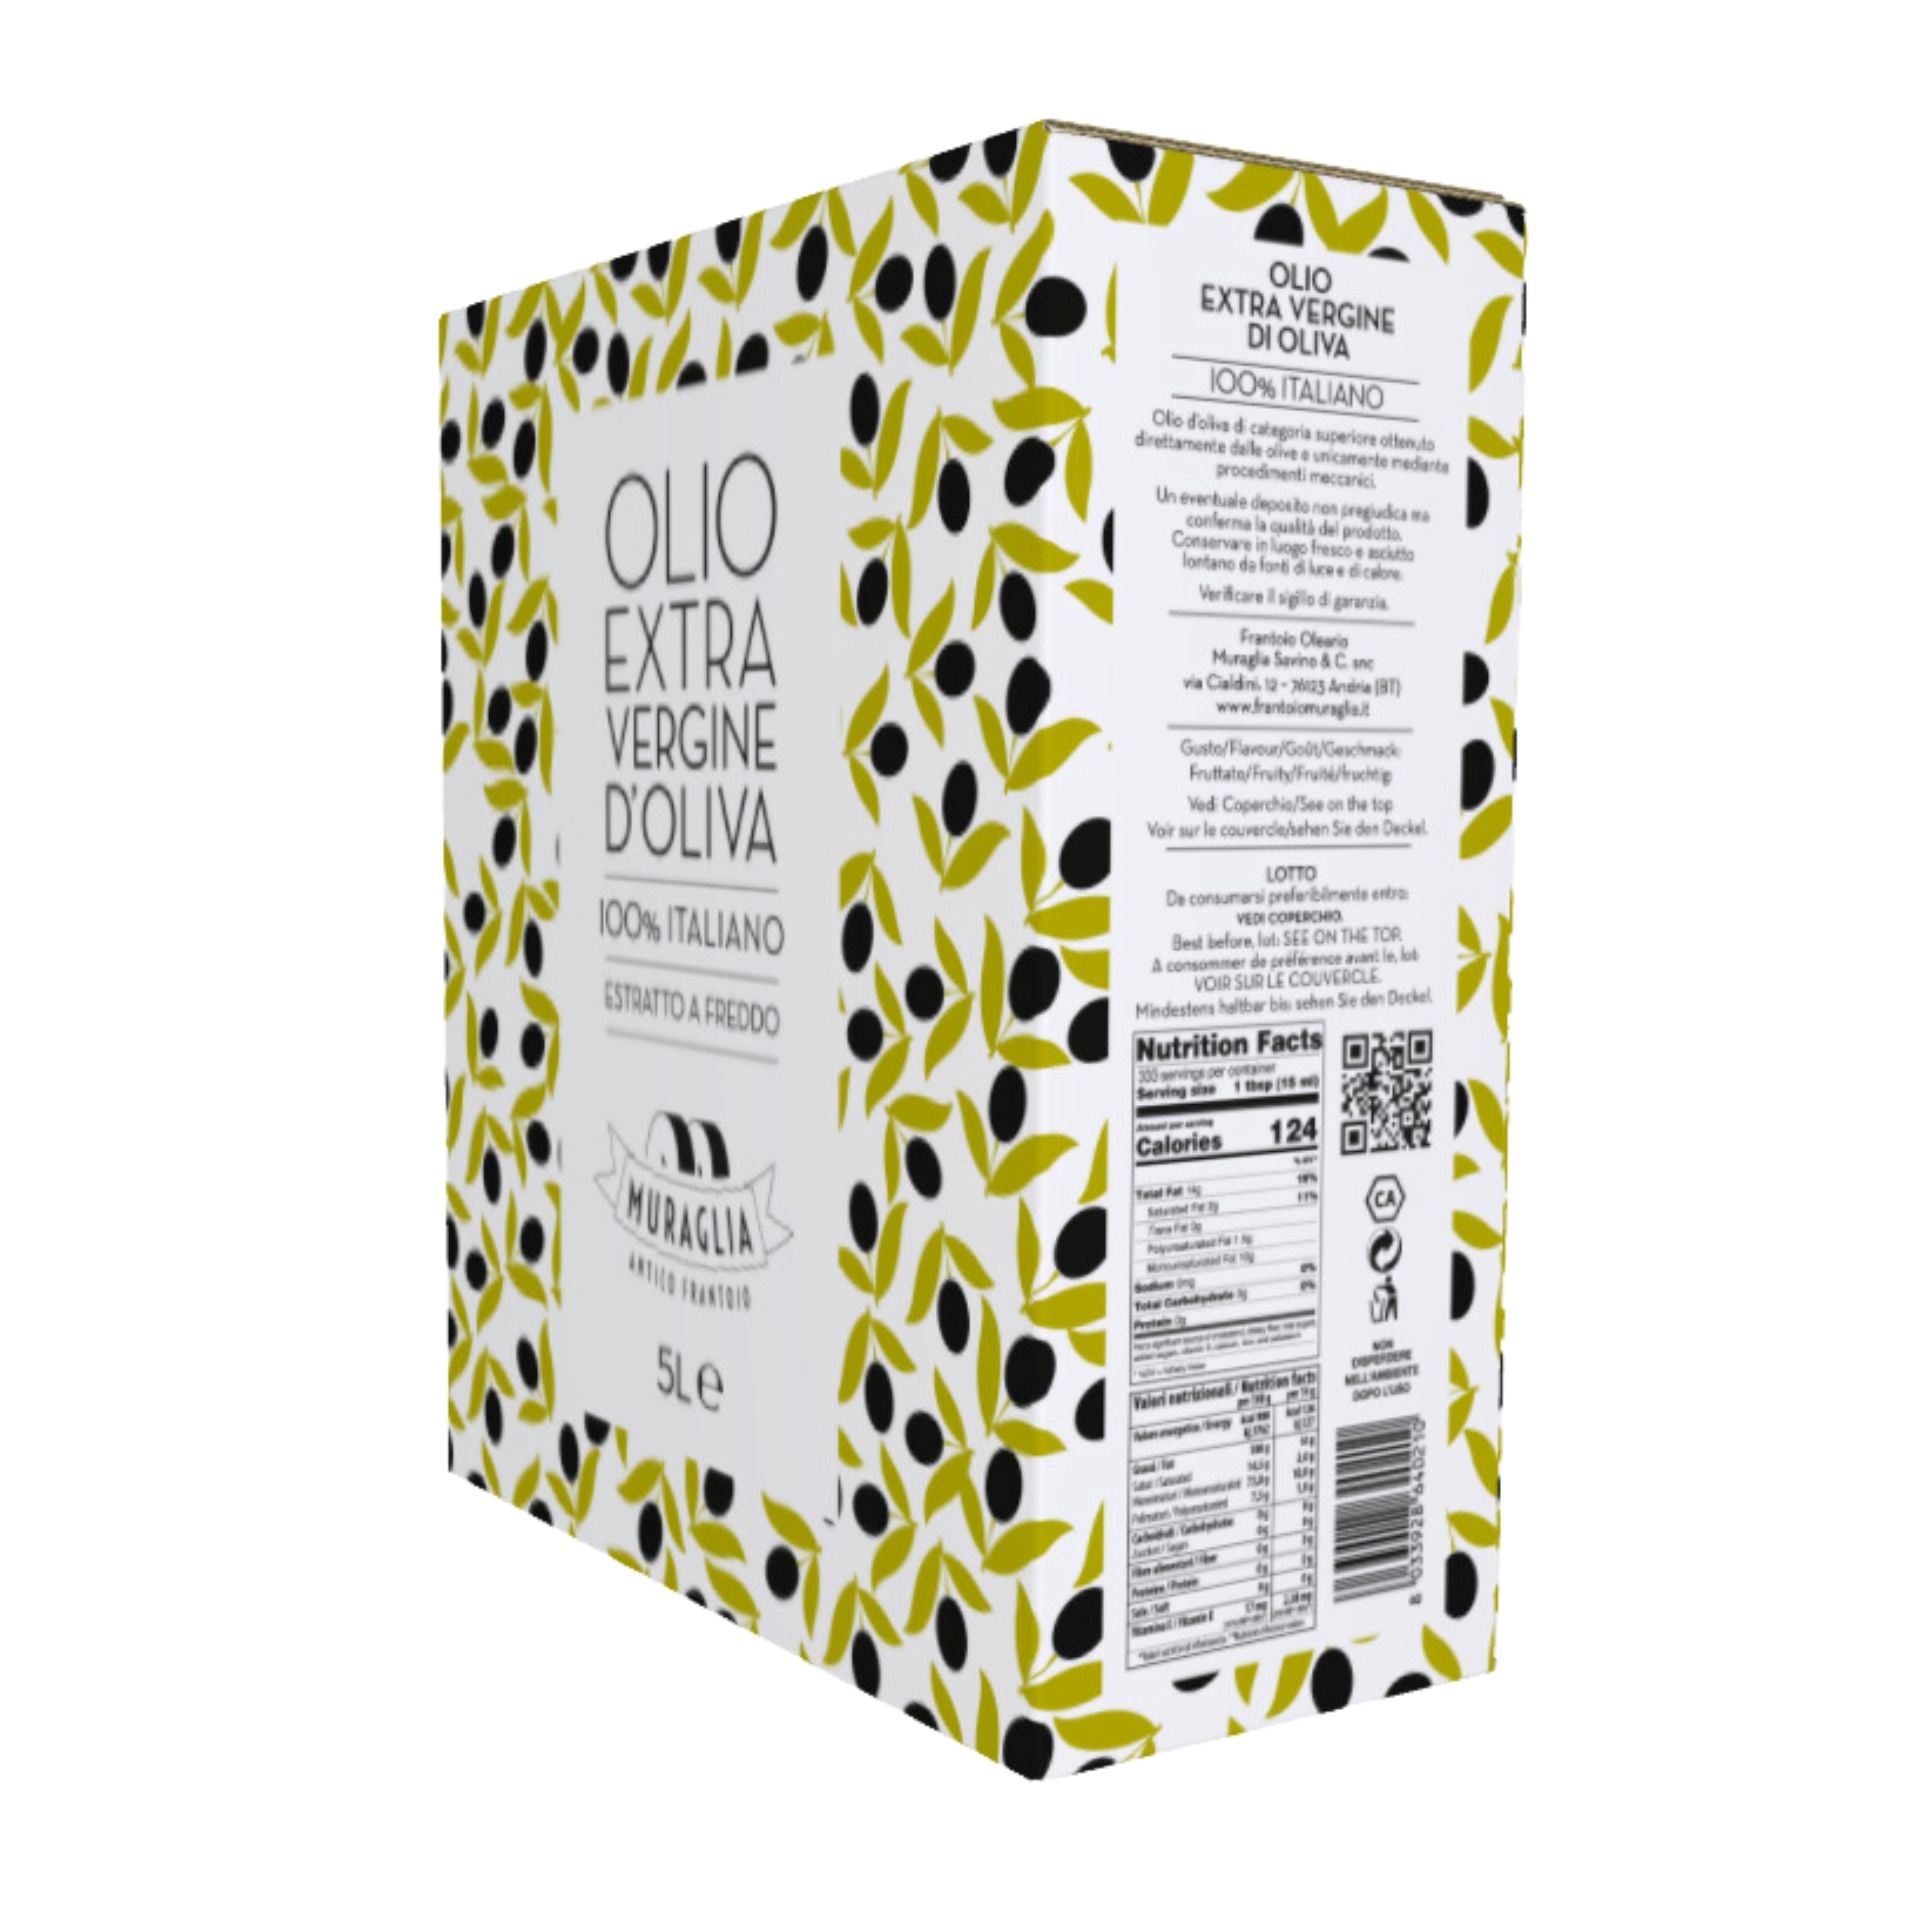 Frantoio Muraglia Bag in Box 5L extra virgin olive oil | Imported and distributed in the UK by Just Gourmet Foods